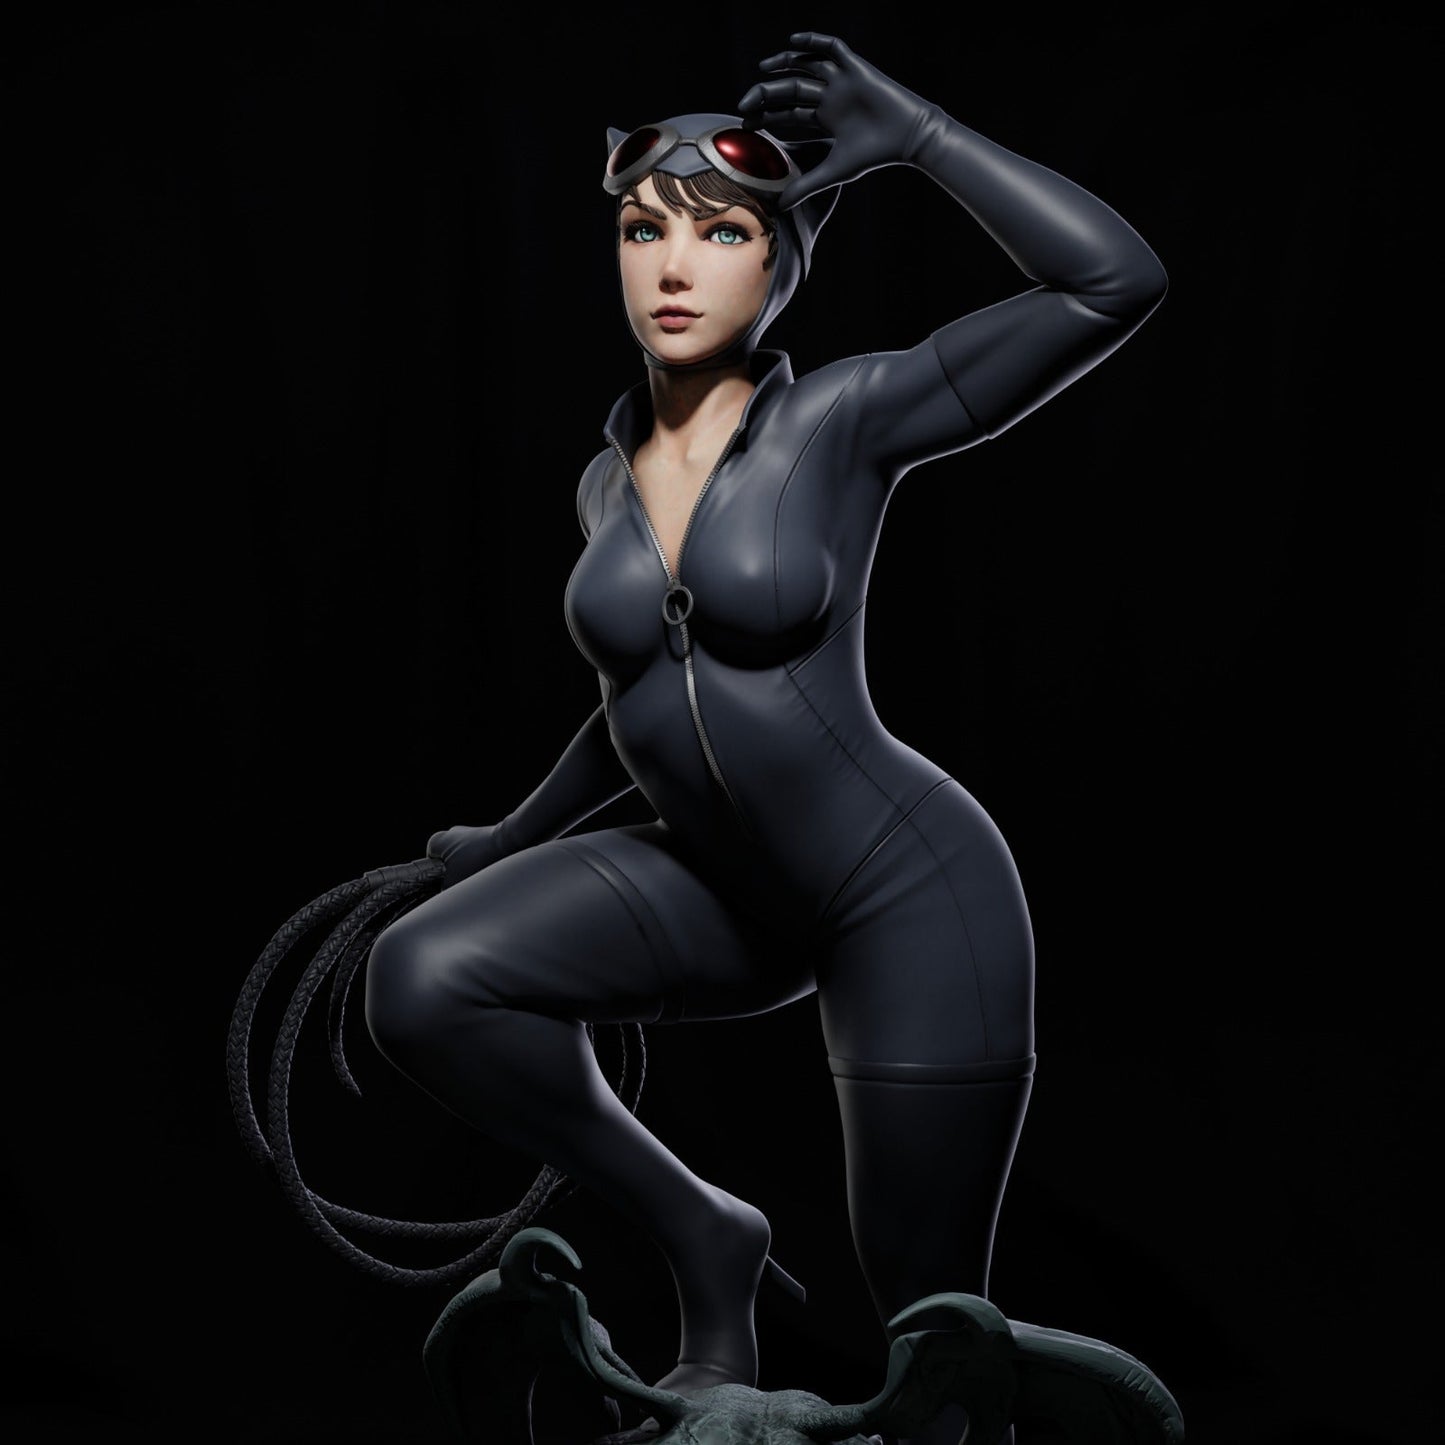 Catwoman 3D Printed Miniature FunArt by ca_3d_art Figurines & Collectible